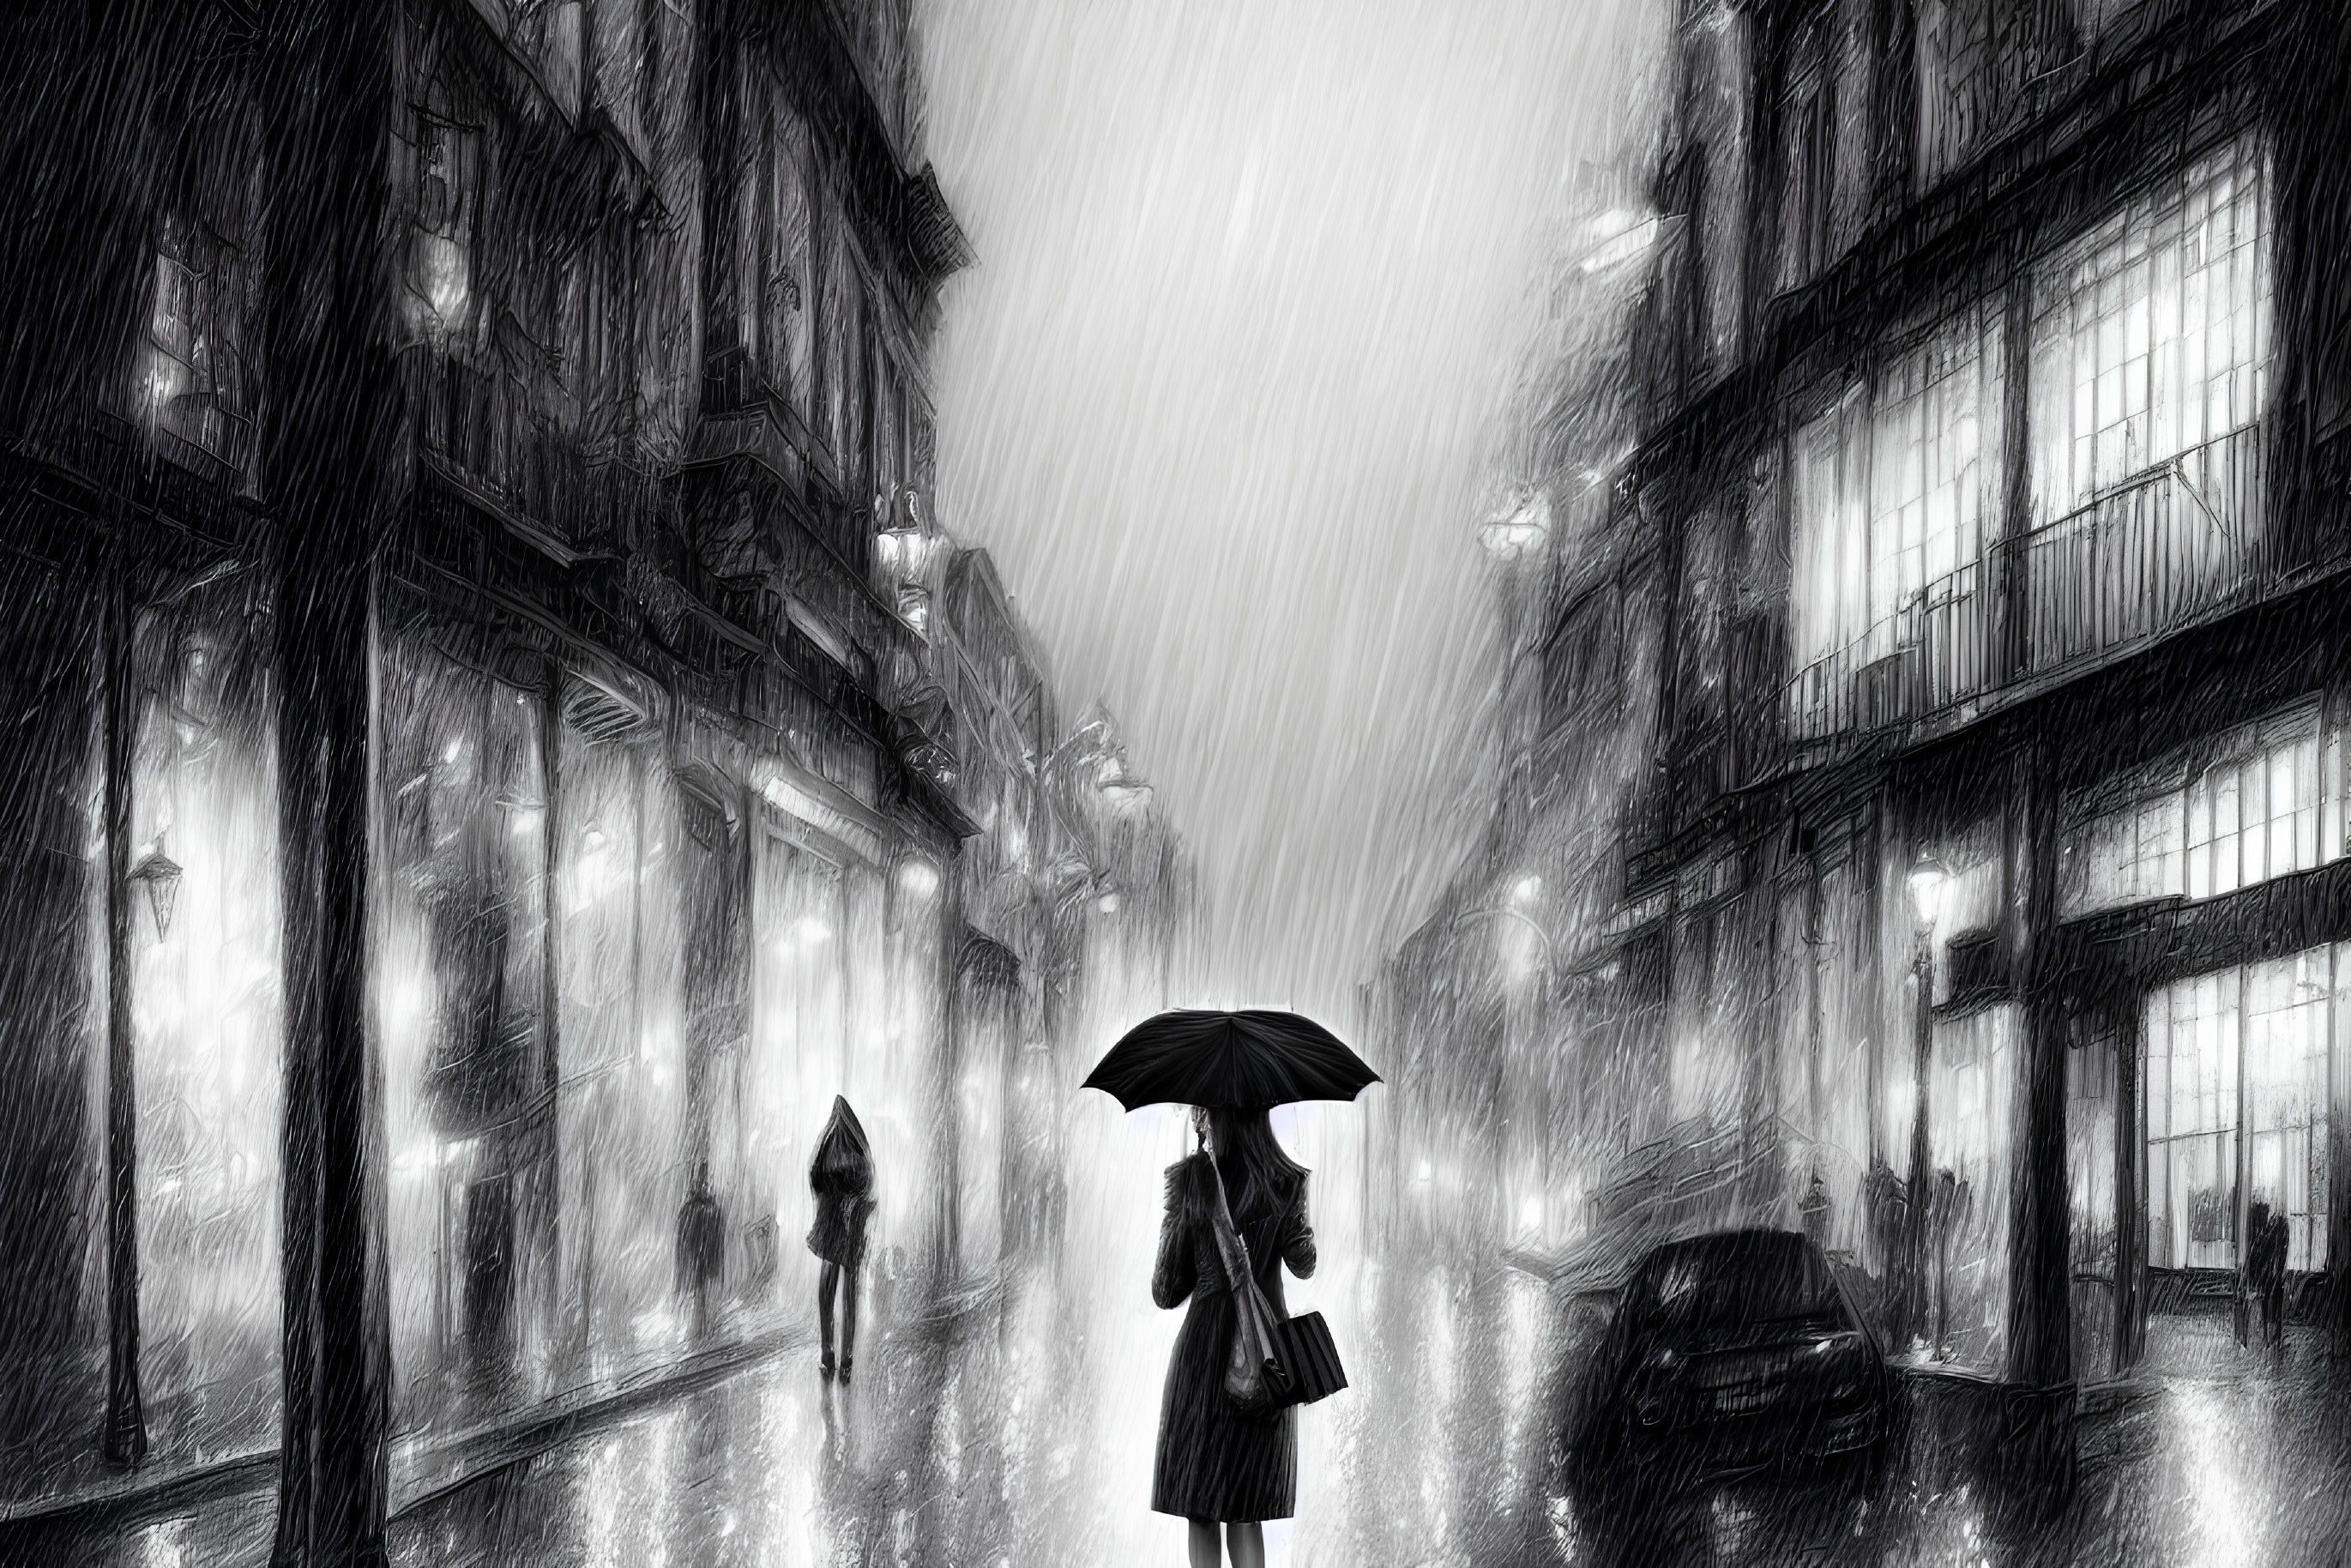 Monochrome image of person with umbrella in rain-soaked street